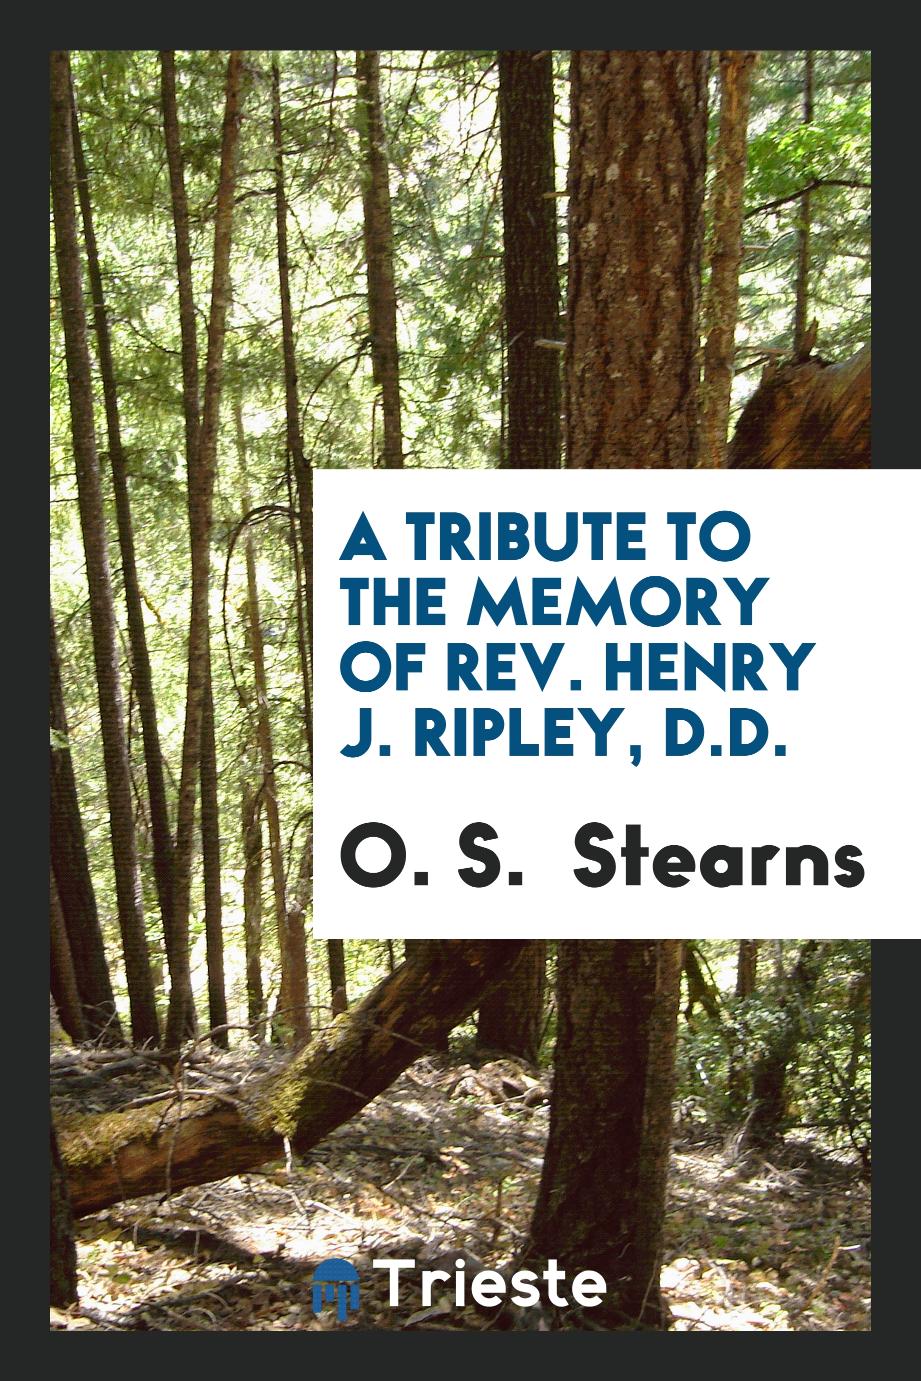 A Tribute to the Memory of Rev. Henry J. Ripley, D.D.